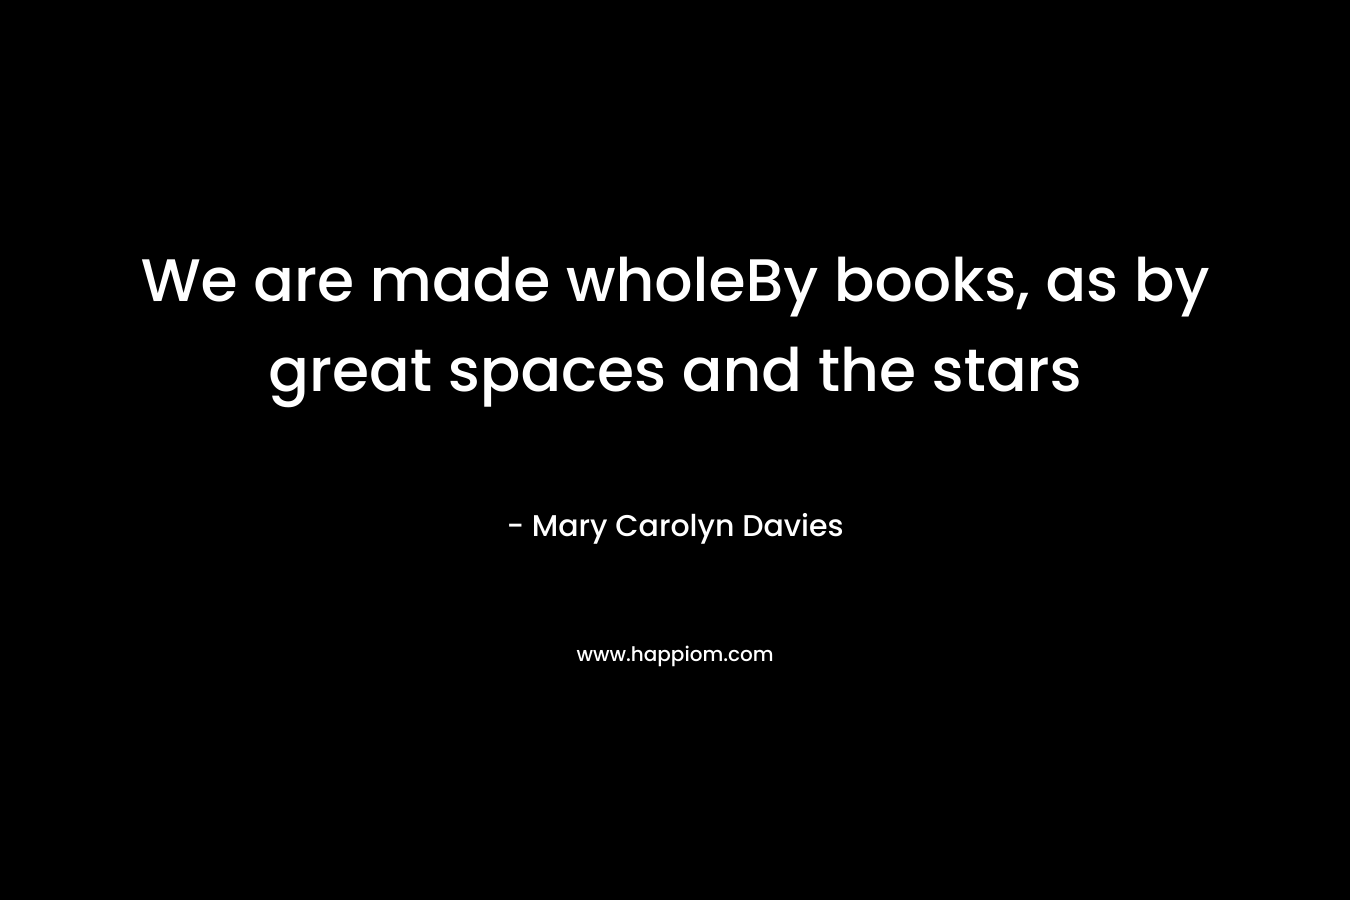 We are made wholeBy books, as by great spaces and the stars – Mary Carolyn Davies